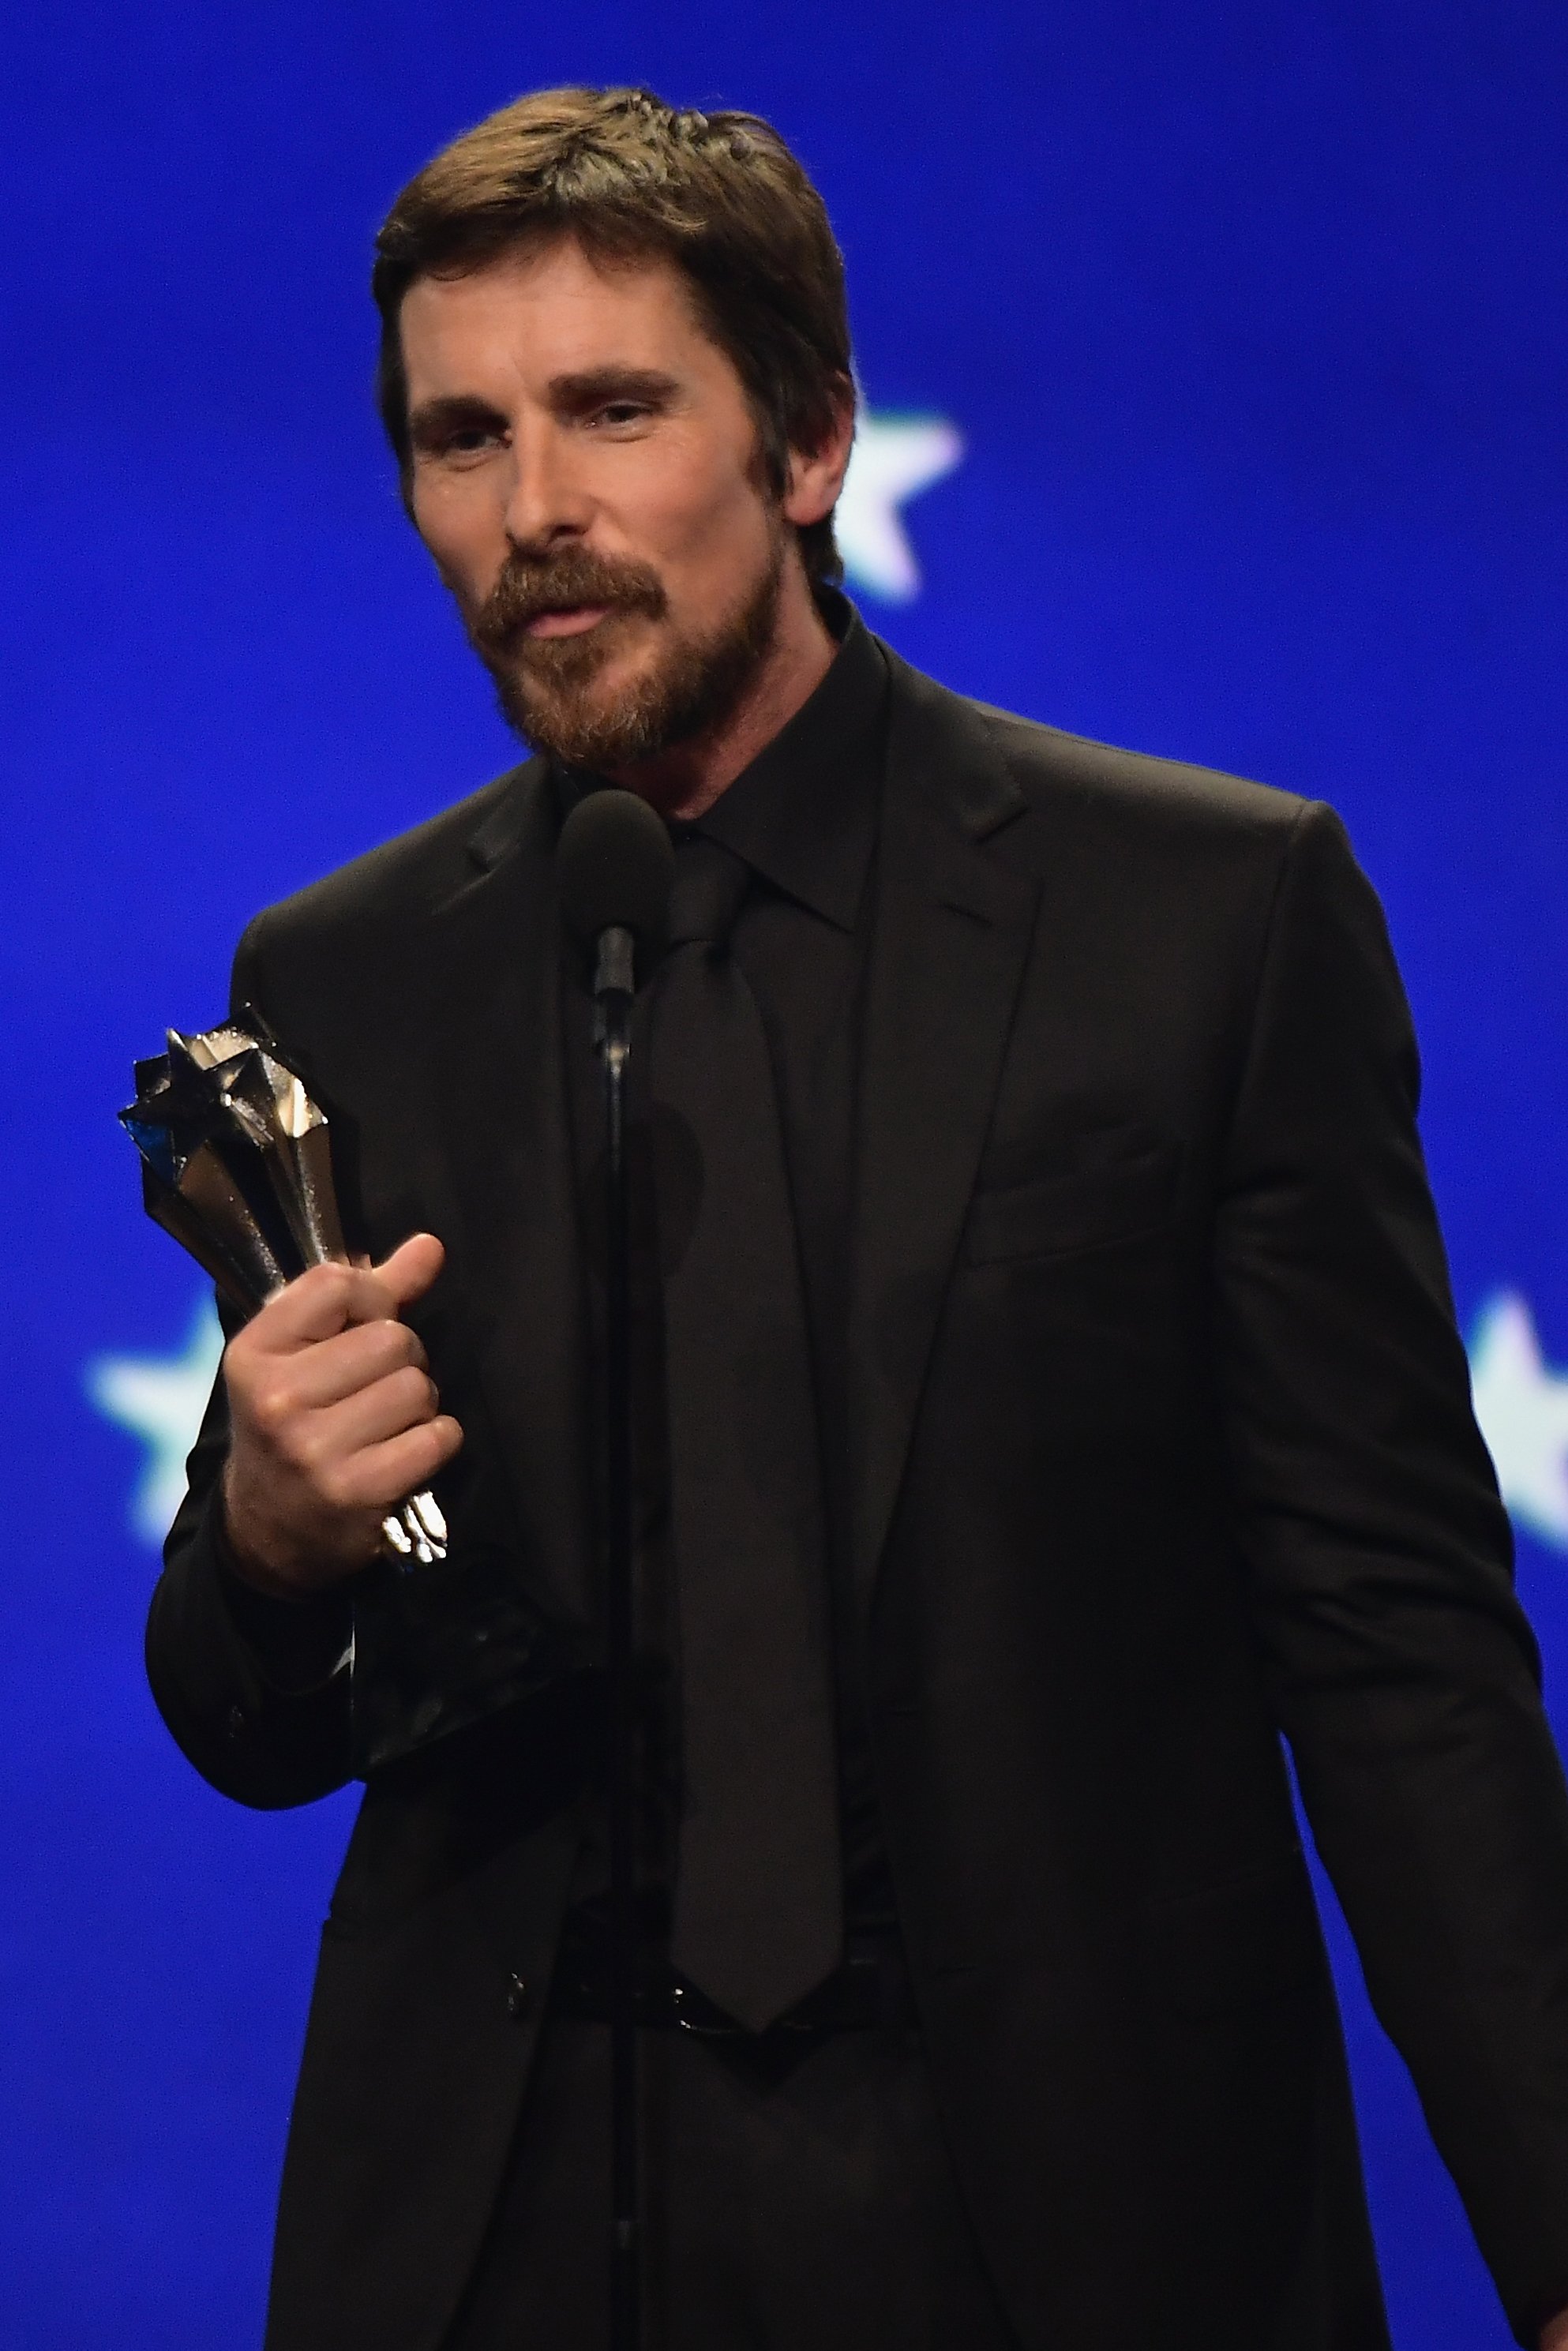 Christian Bale accepts Best Actor in a Comedy Movie Award for "Vice" during the 24th annual Critics' Choice Awards at Barker Hangar on January 13, 2019 in Santa Monica, California. | Source: Getty Images